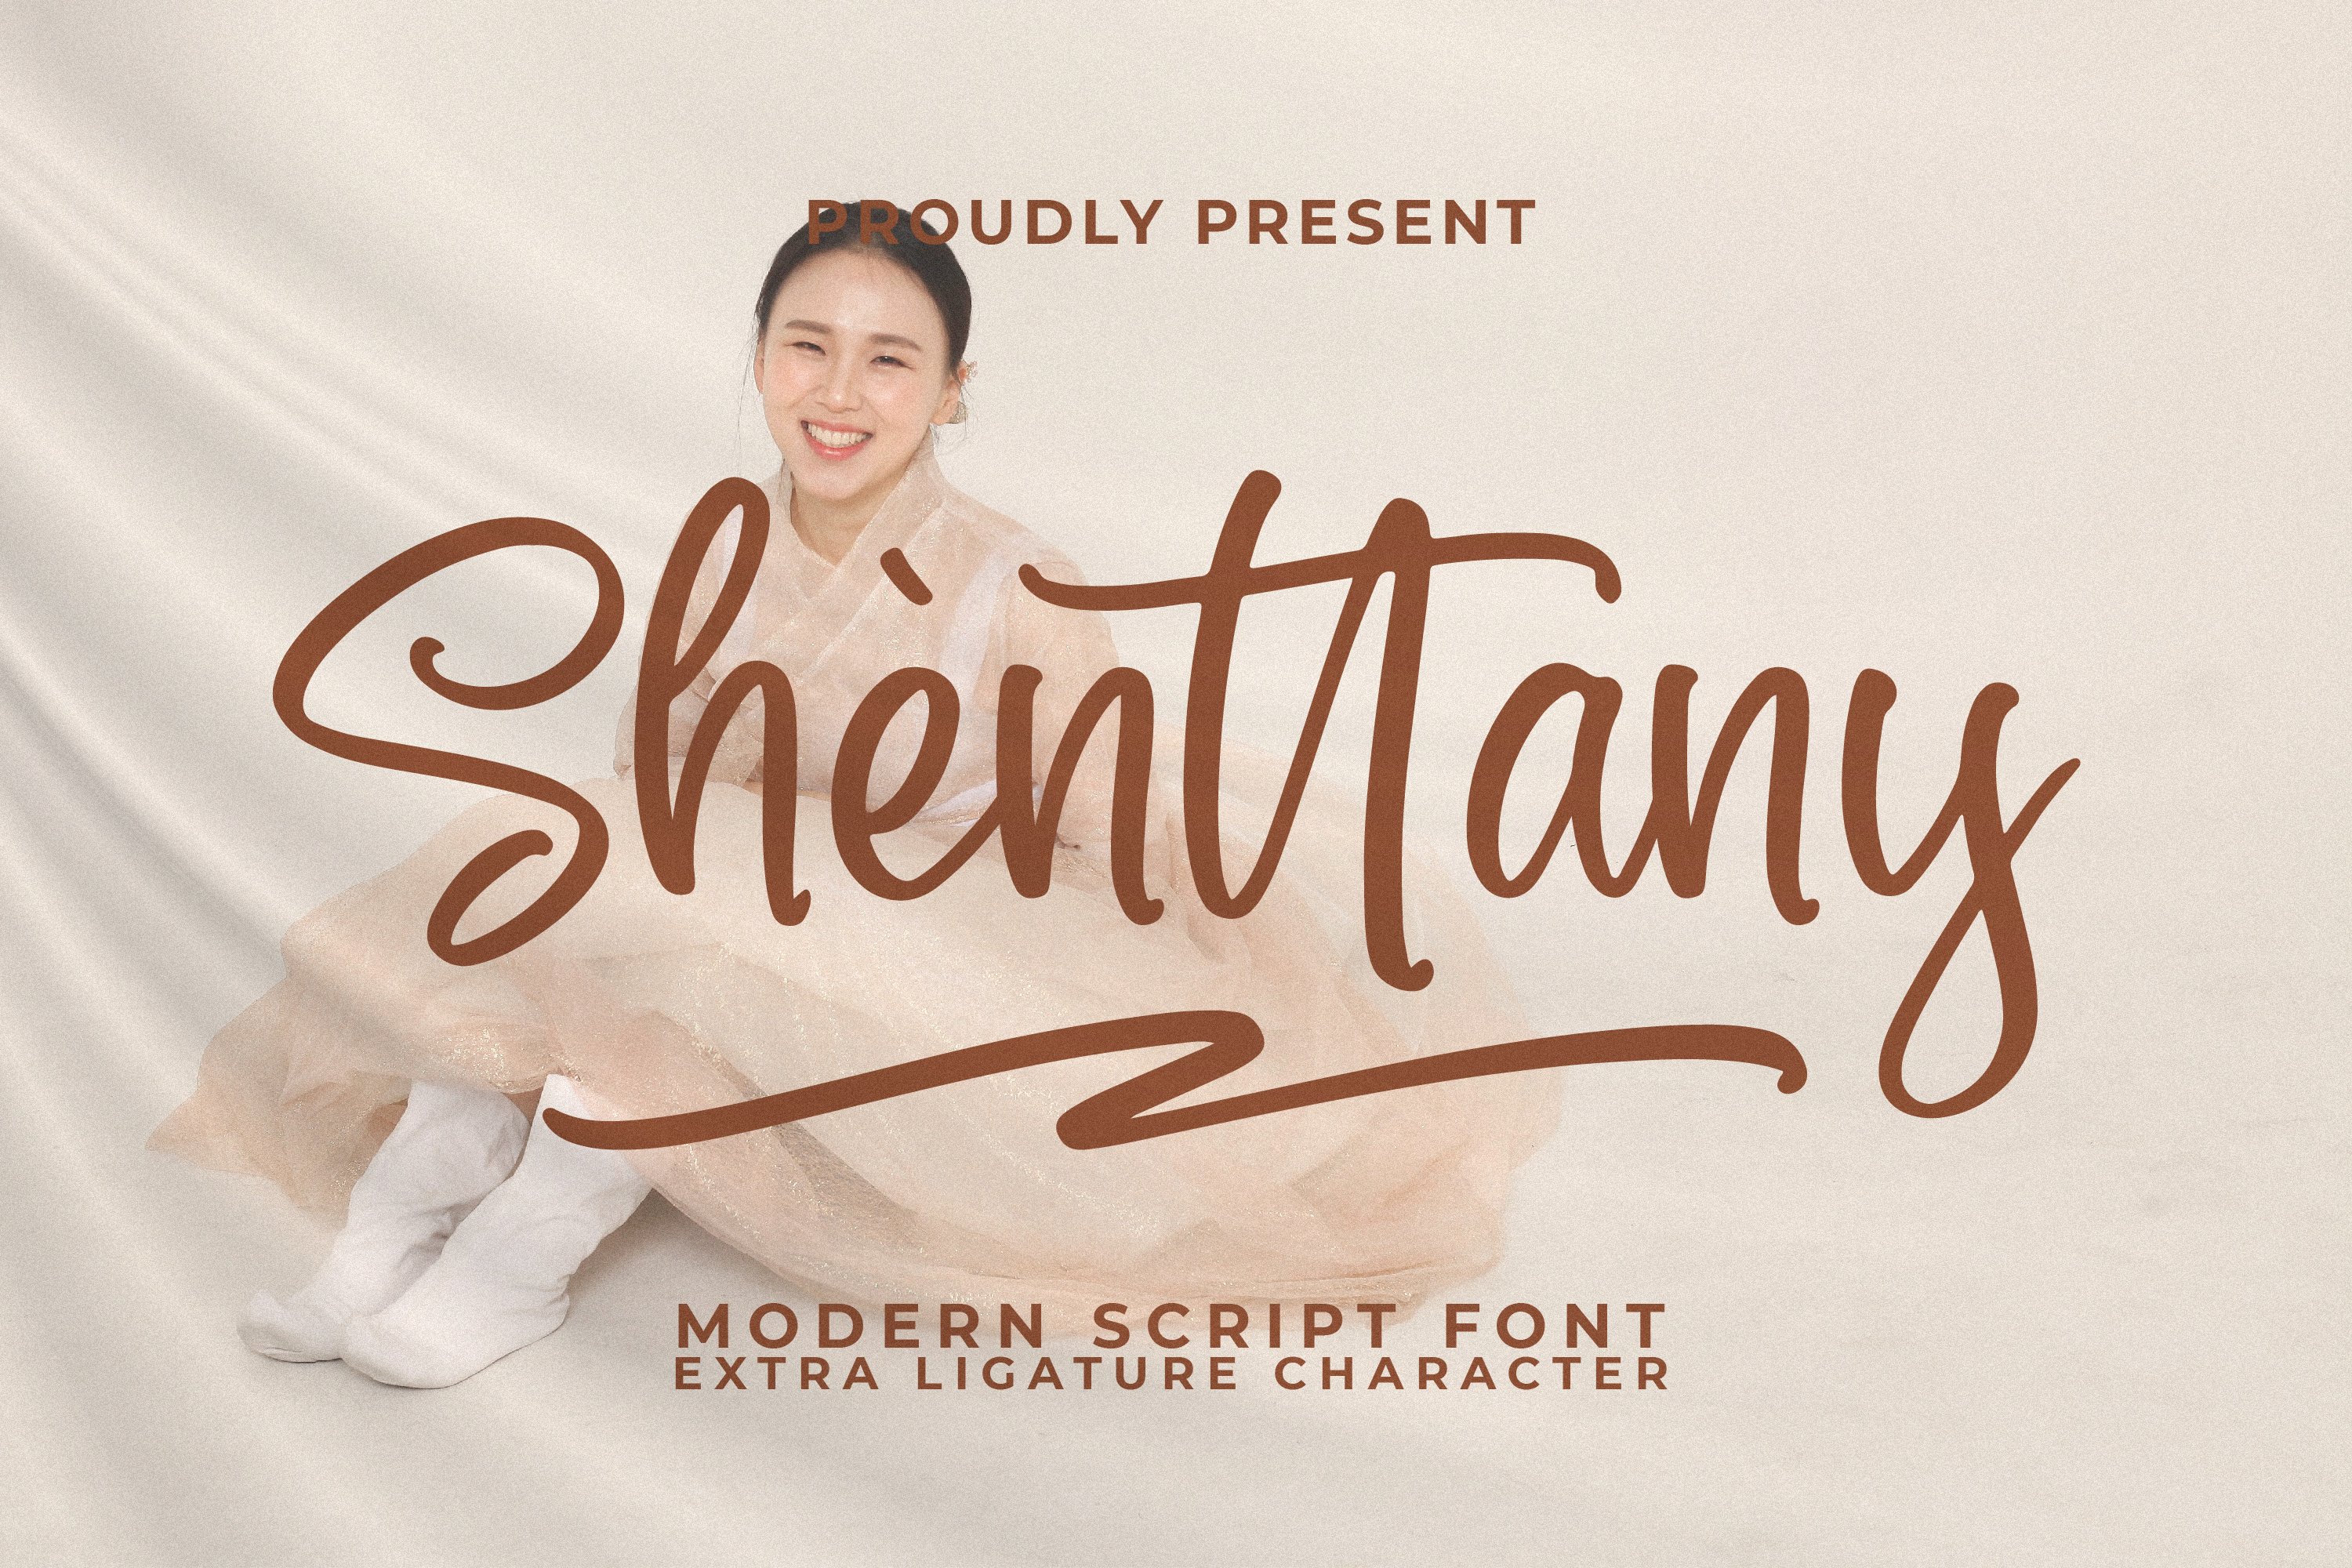 Example font Shènttany #1